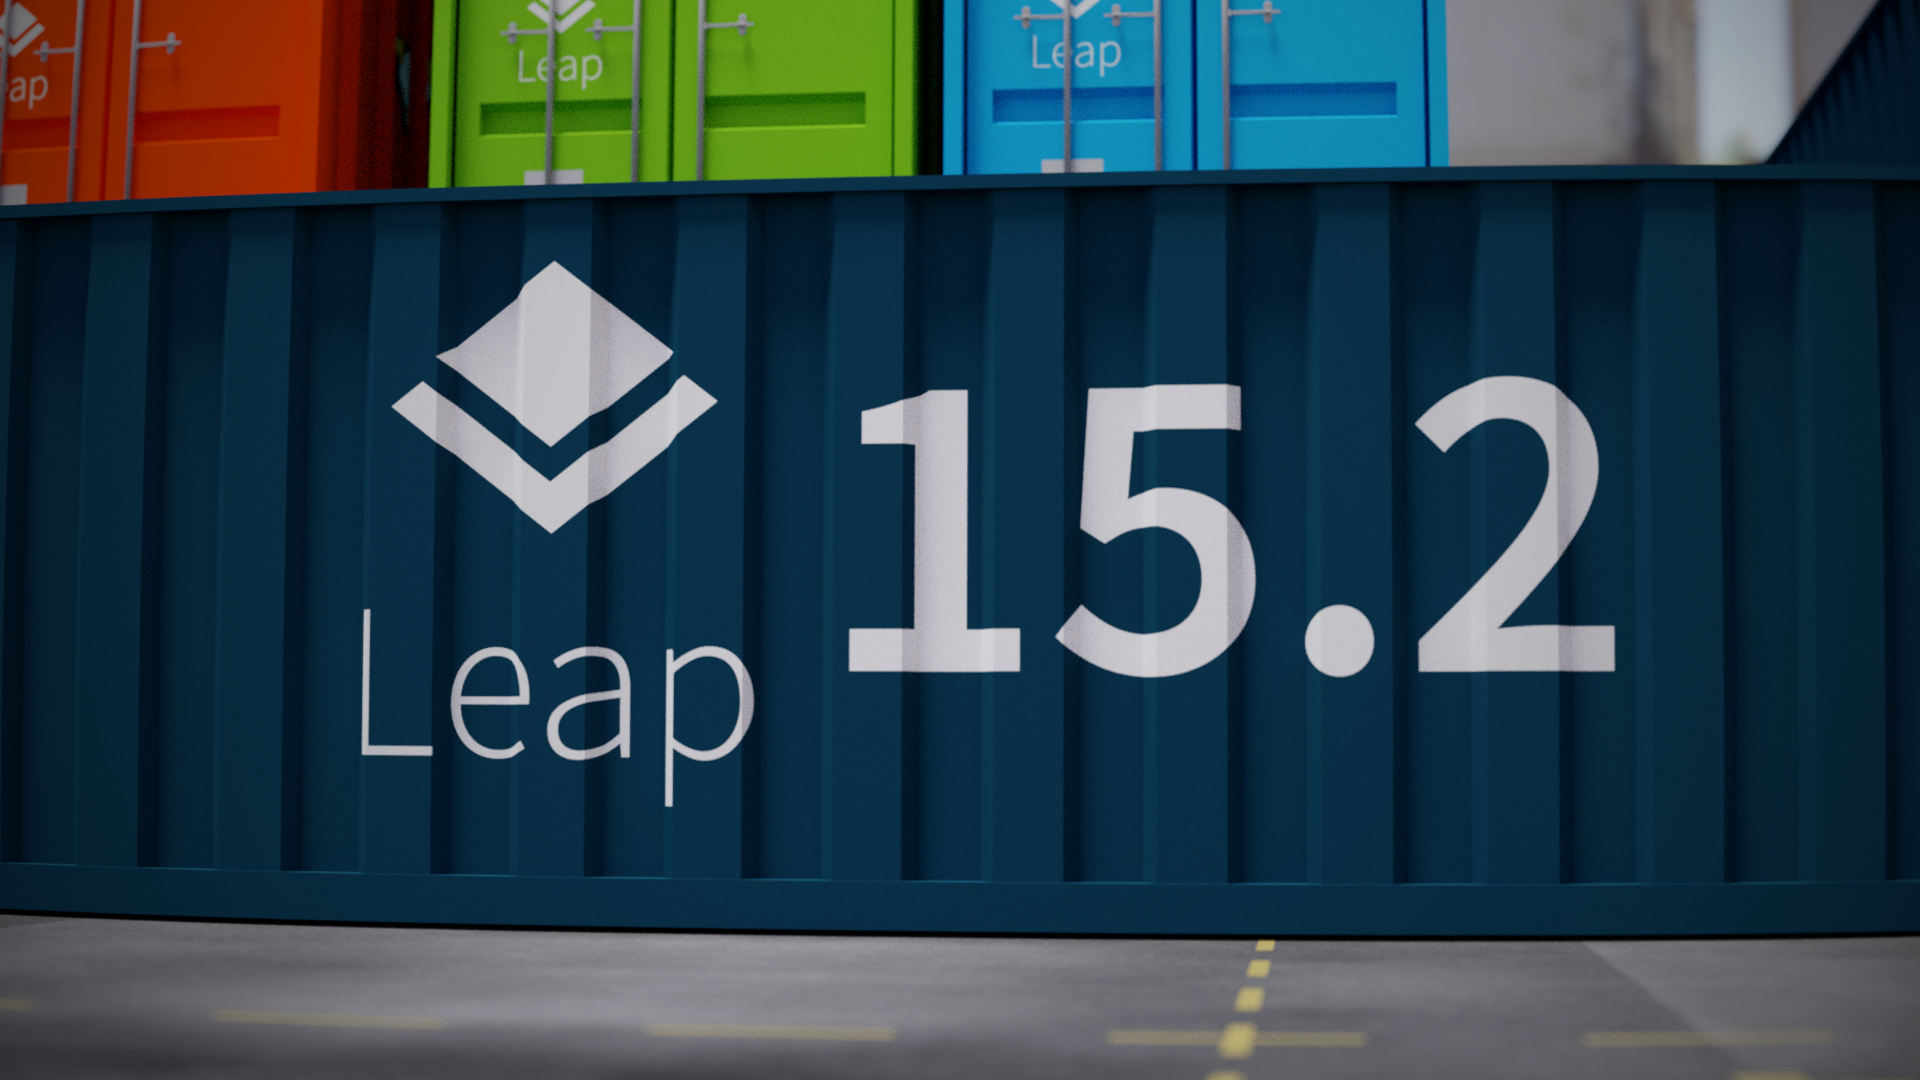 openSUSE Leap 15.2 is Available for Windows Subsystem for Linux